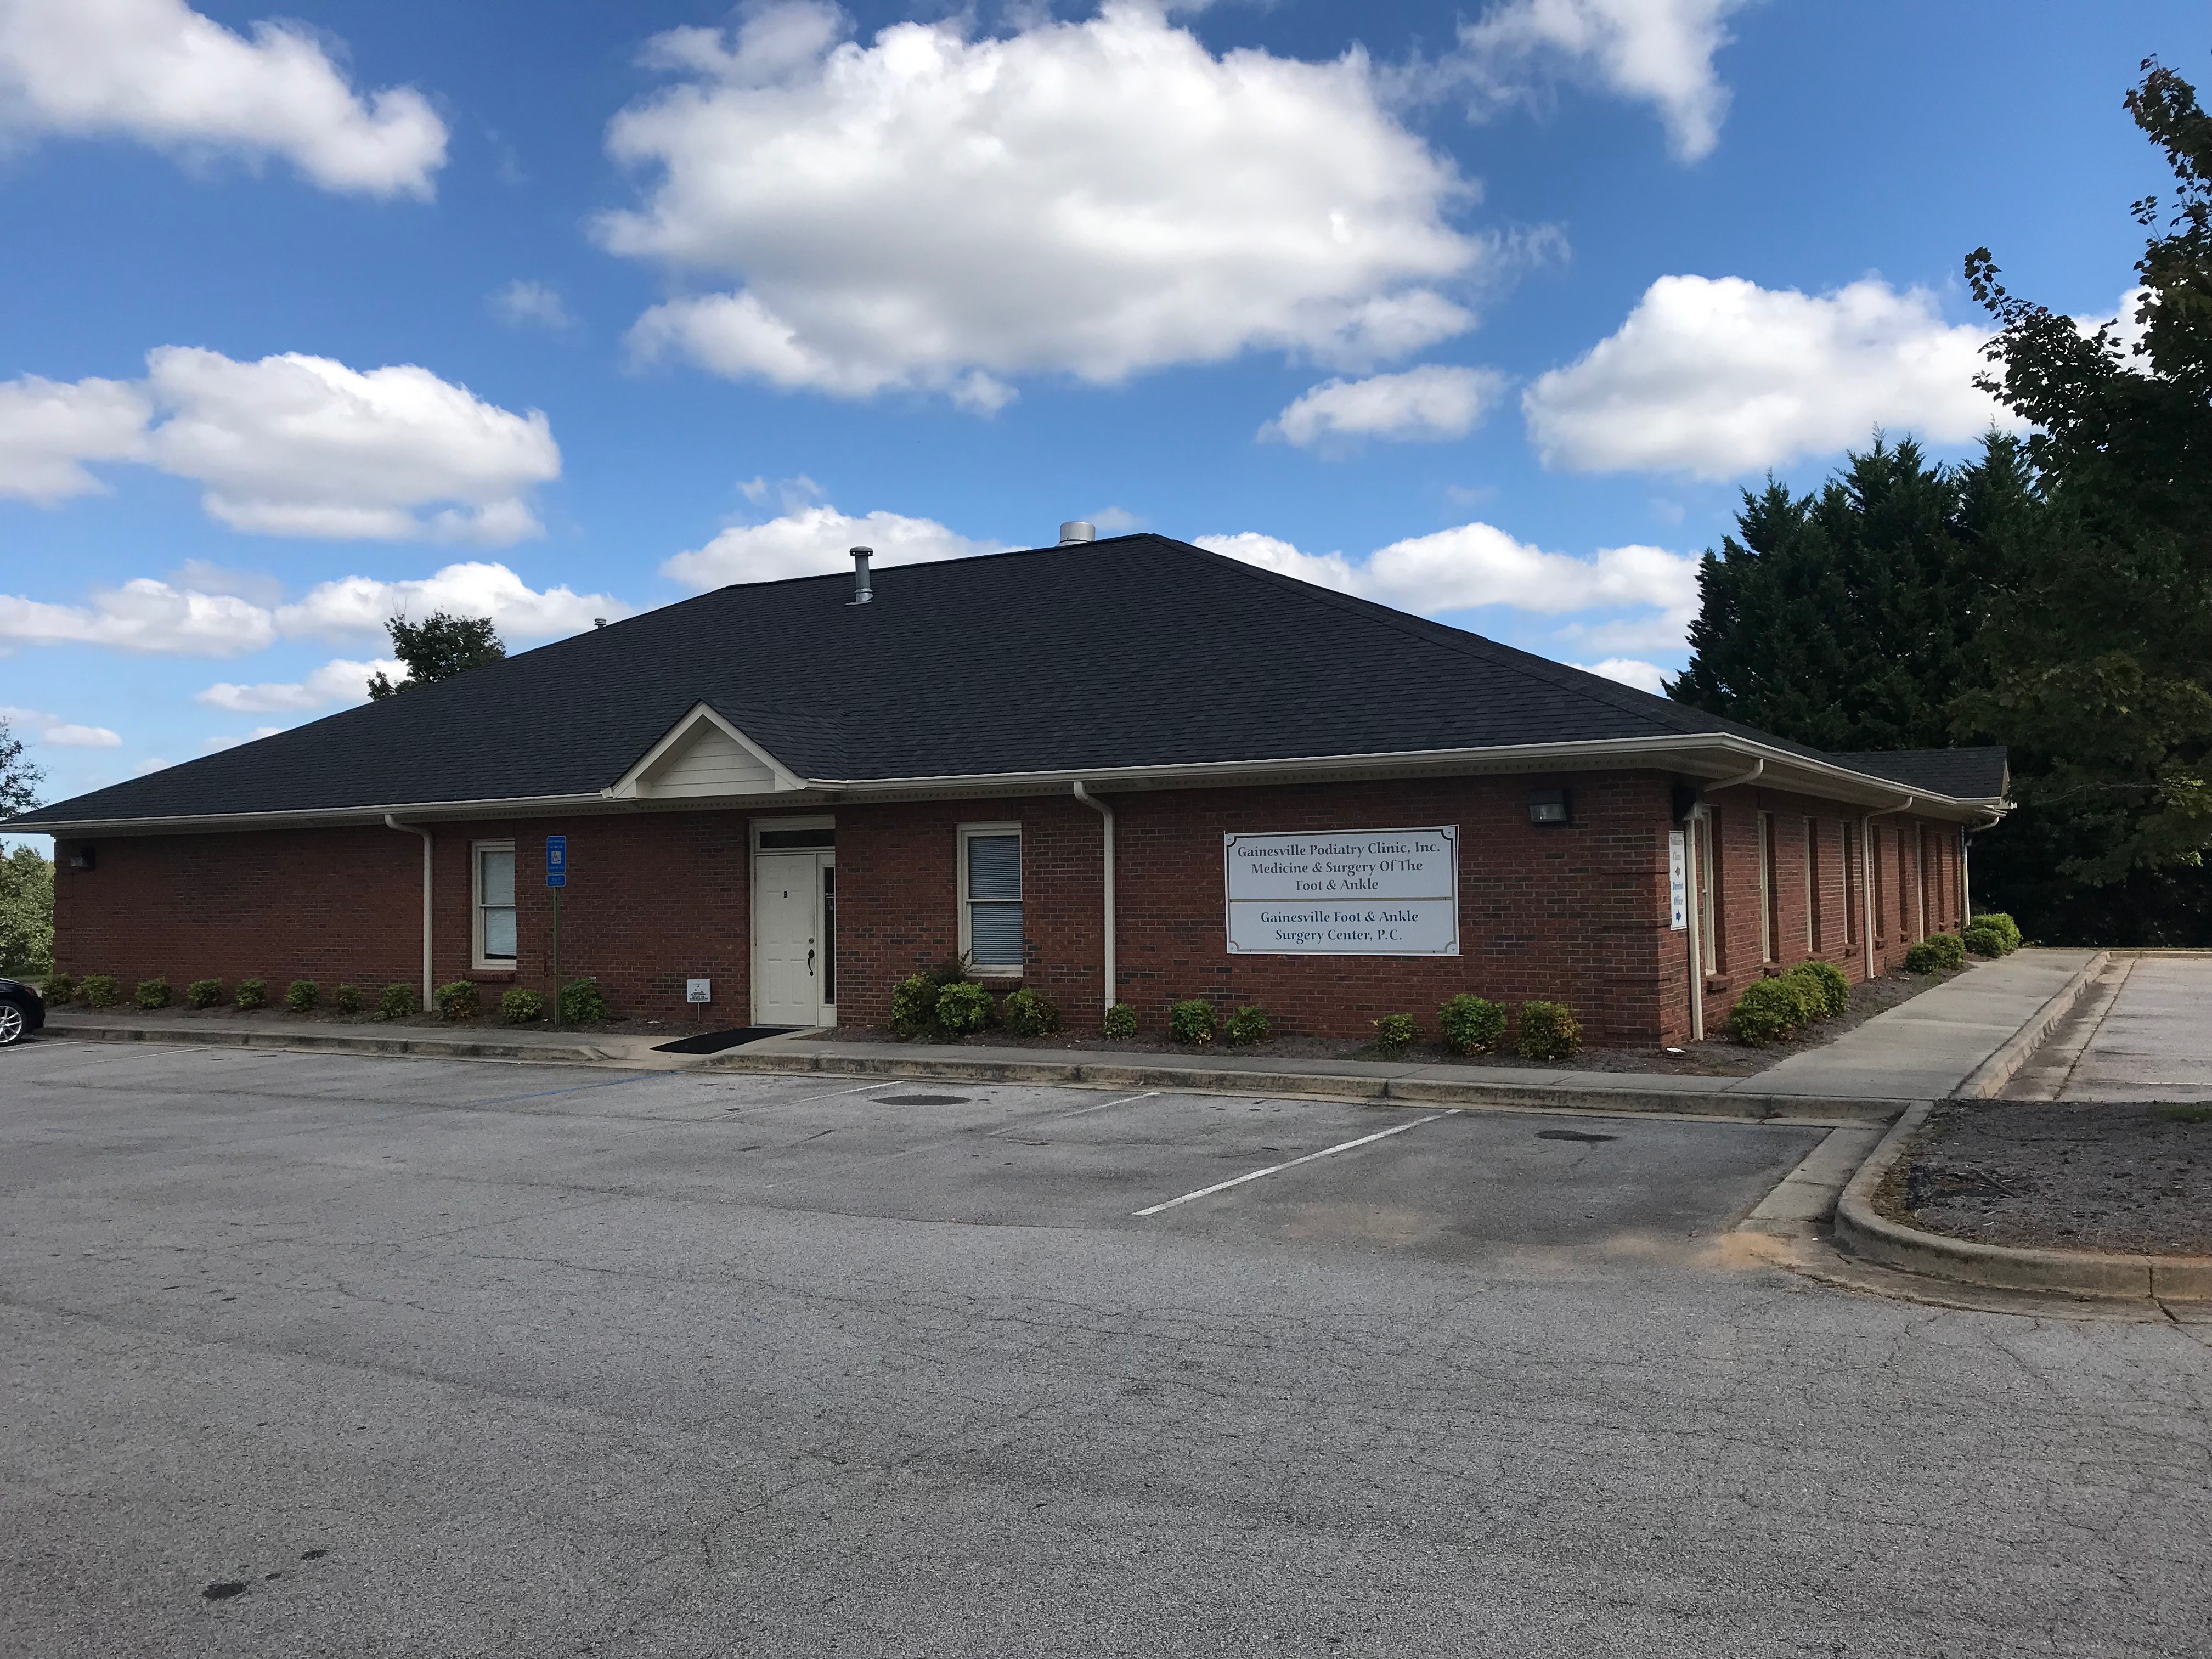 Gainesville Podiatry Joins The Ankle & Foot Centers of Georgia Family!